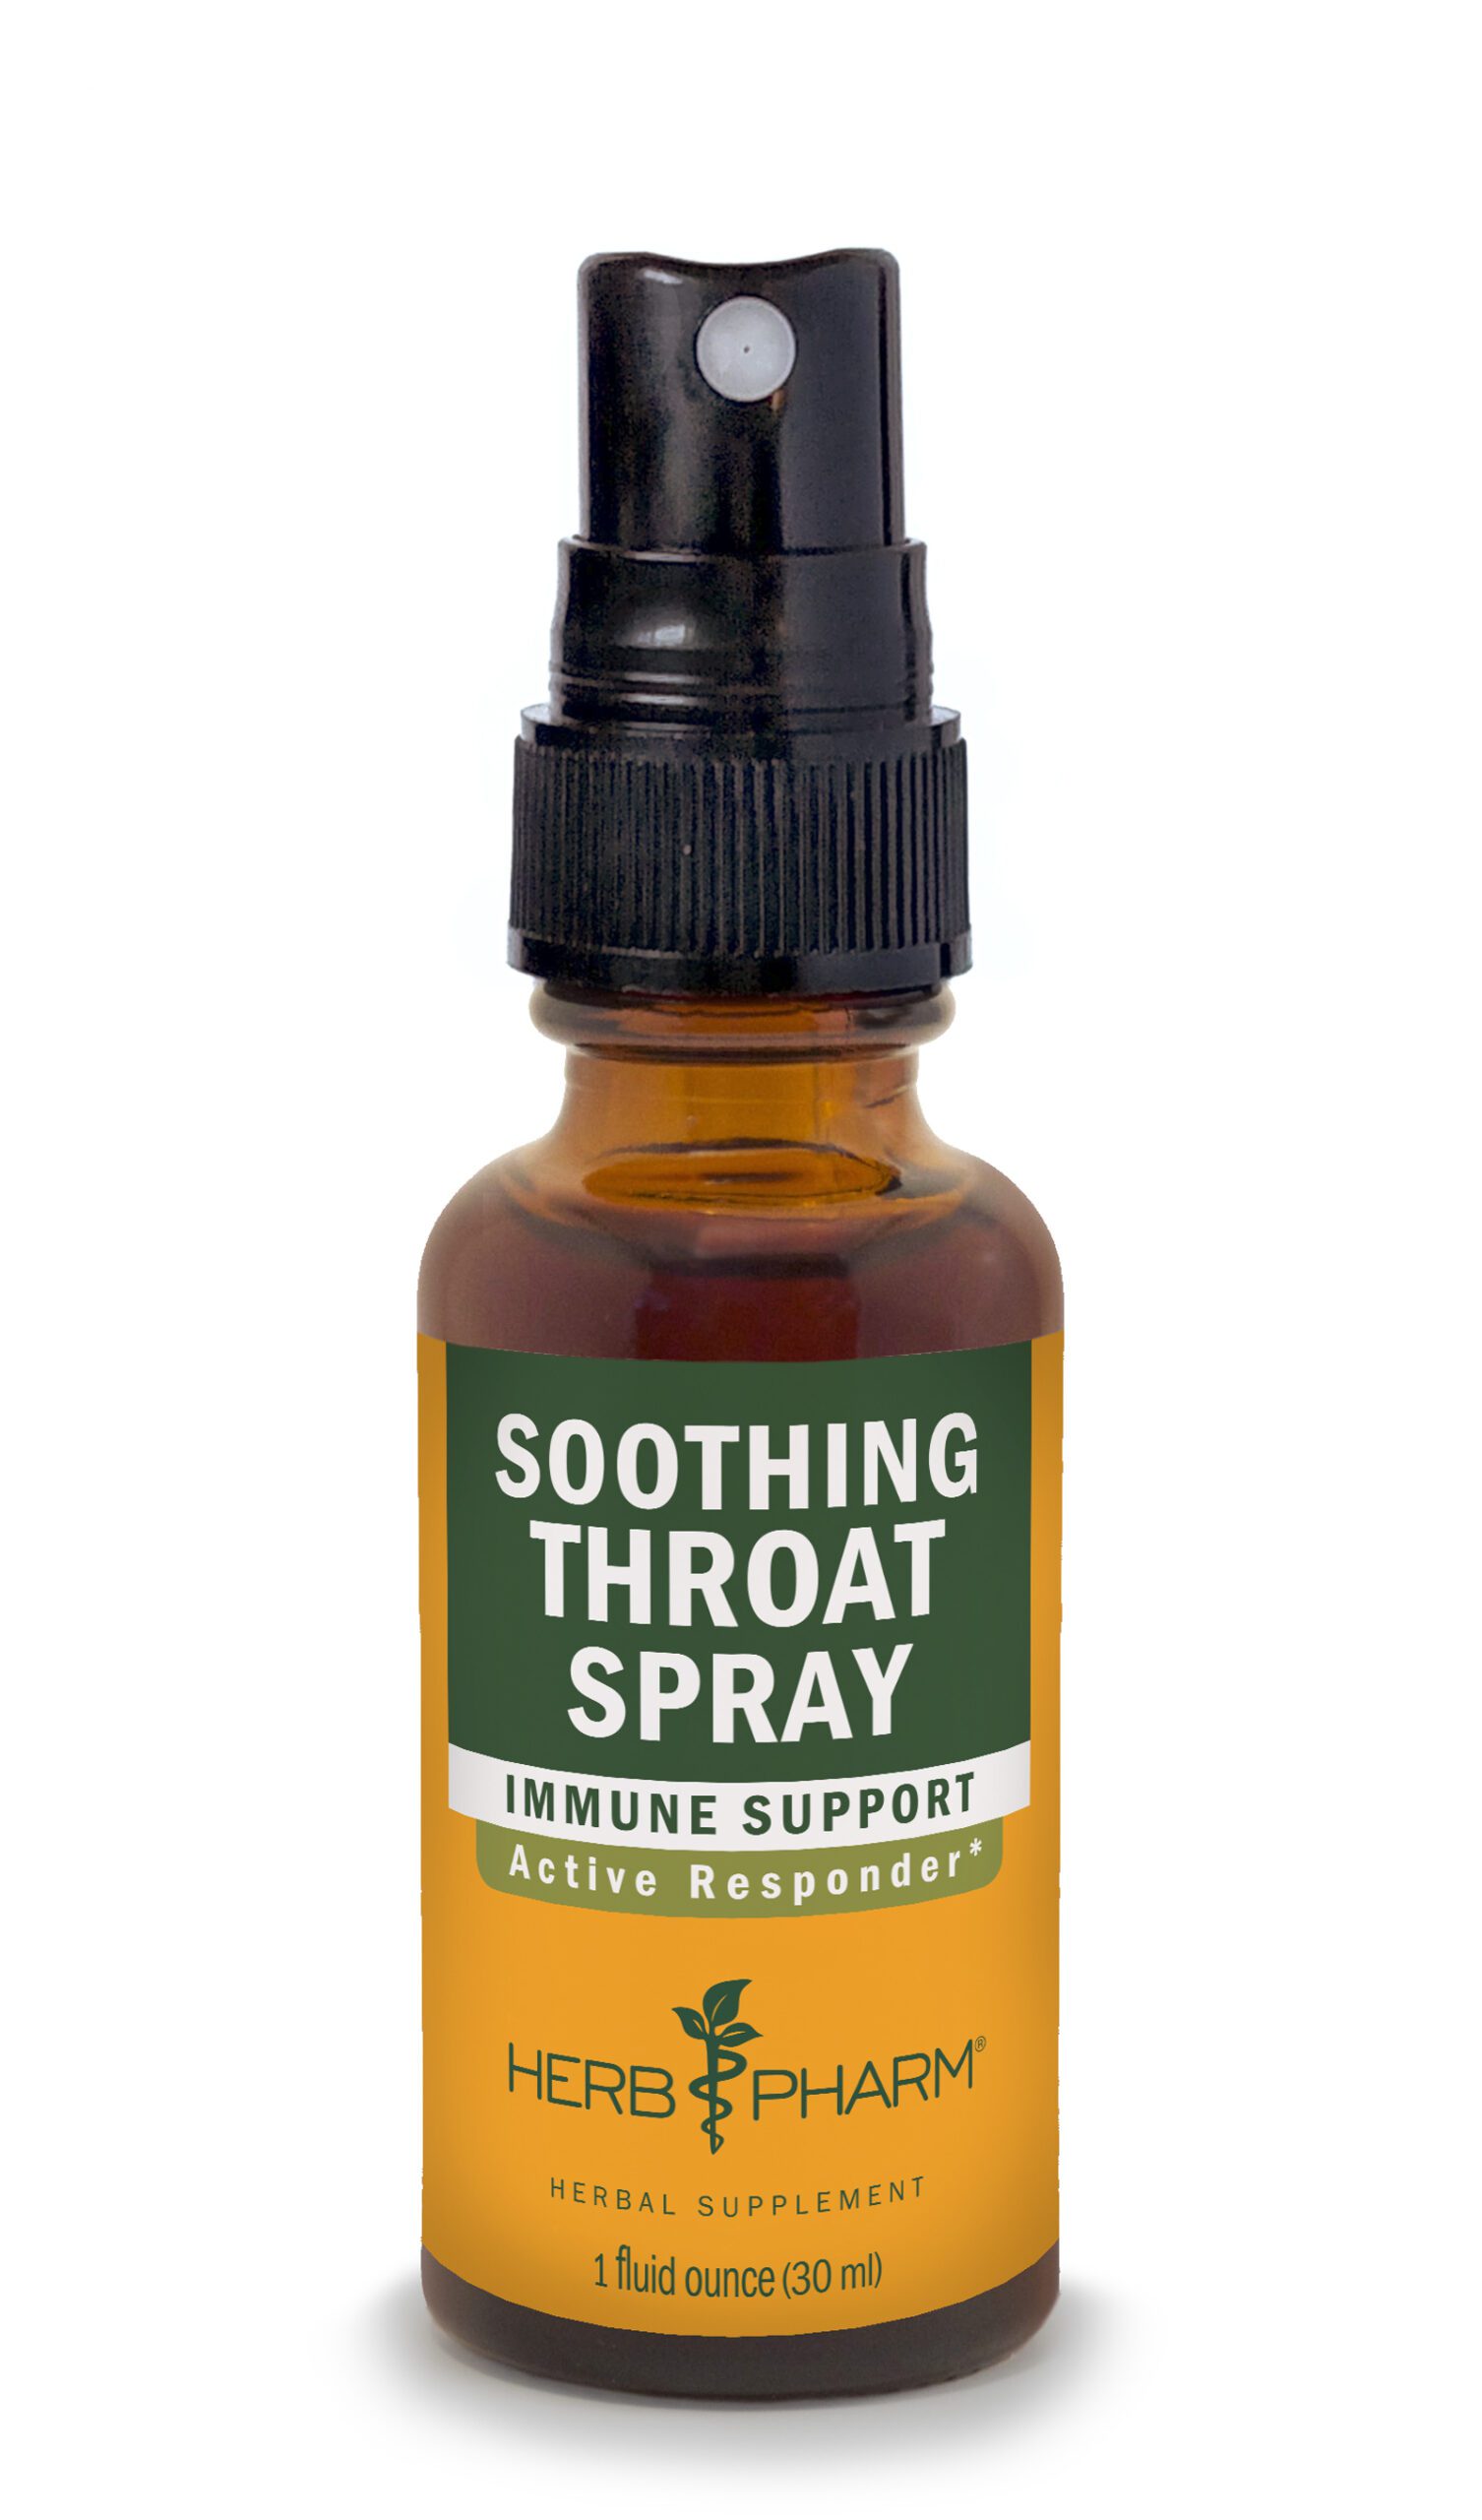 Product Listing Image for Herb Pharm Soothing Throat Spray 1oz